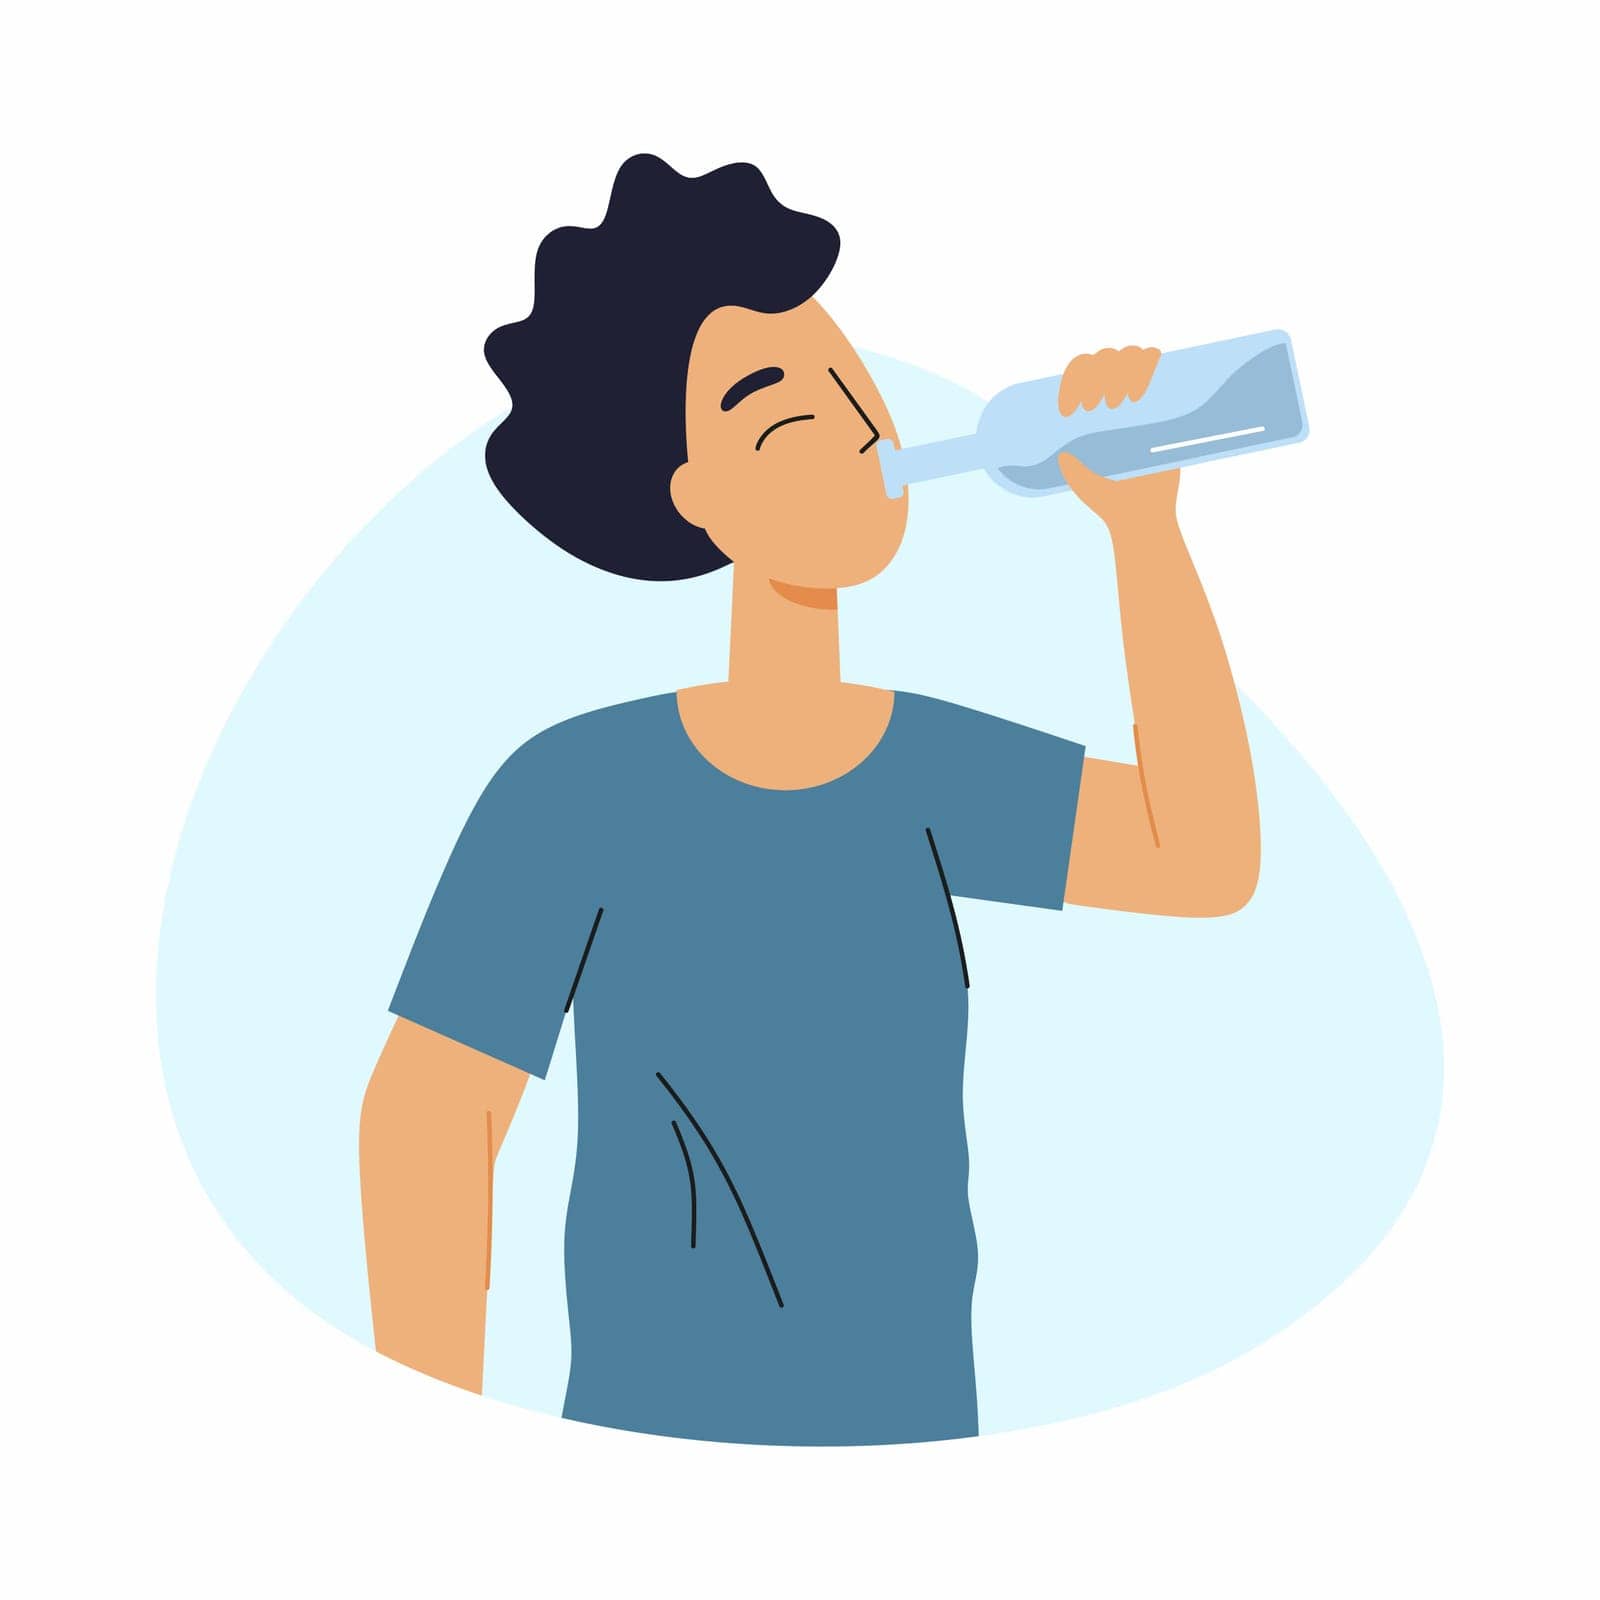 Man drinks wine from glass bottle. Alcohol dependence. Vector character in flat style.